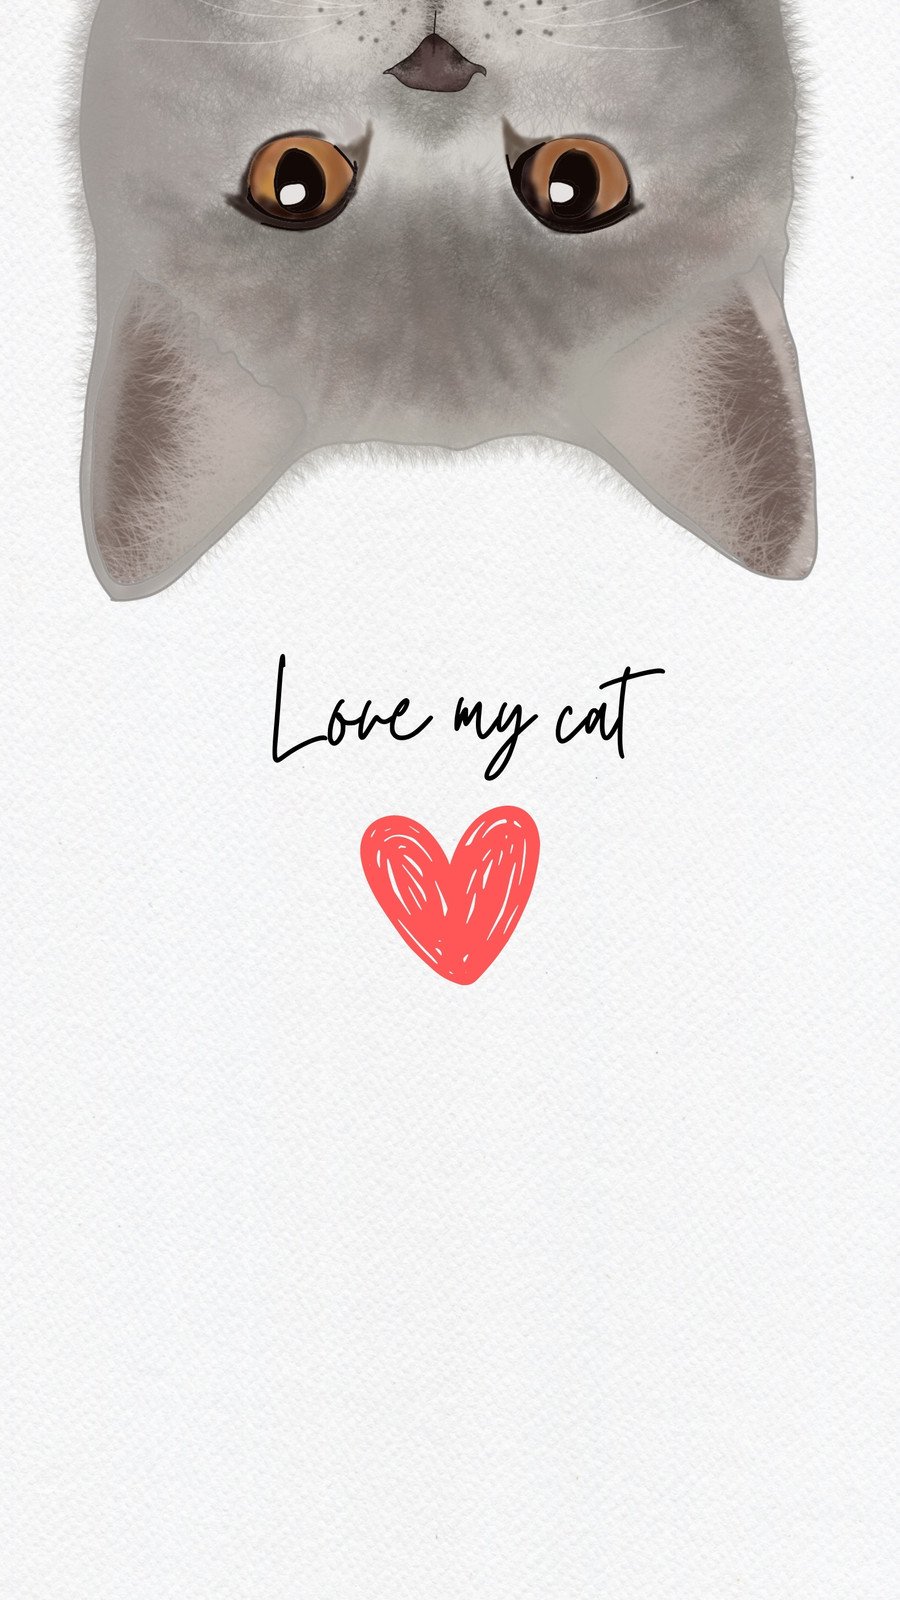 Page 4 - Free customizable cat phone wallpaper templates | Canva